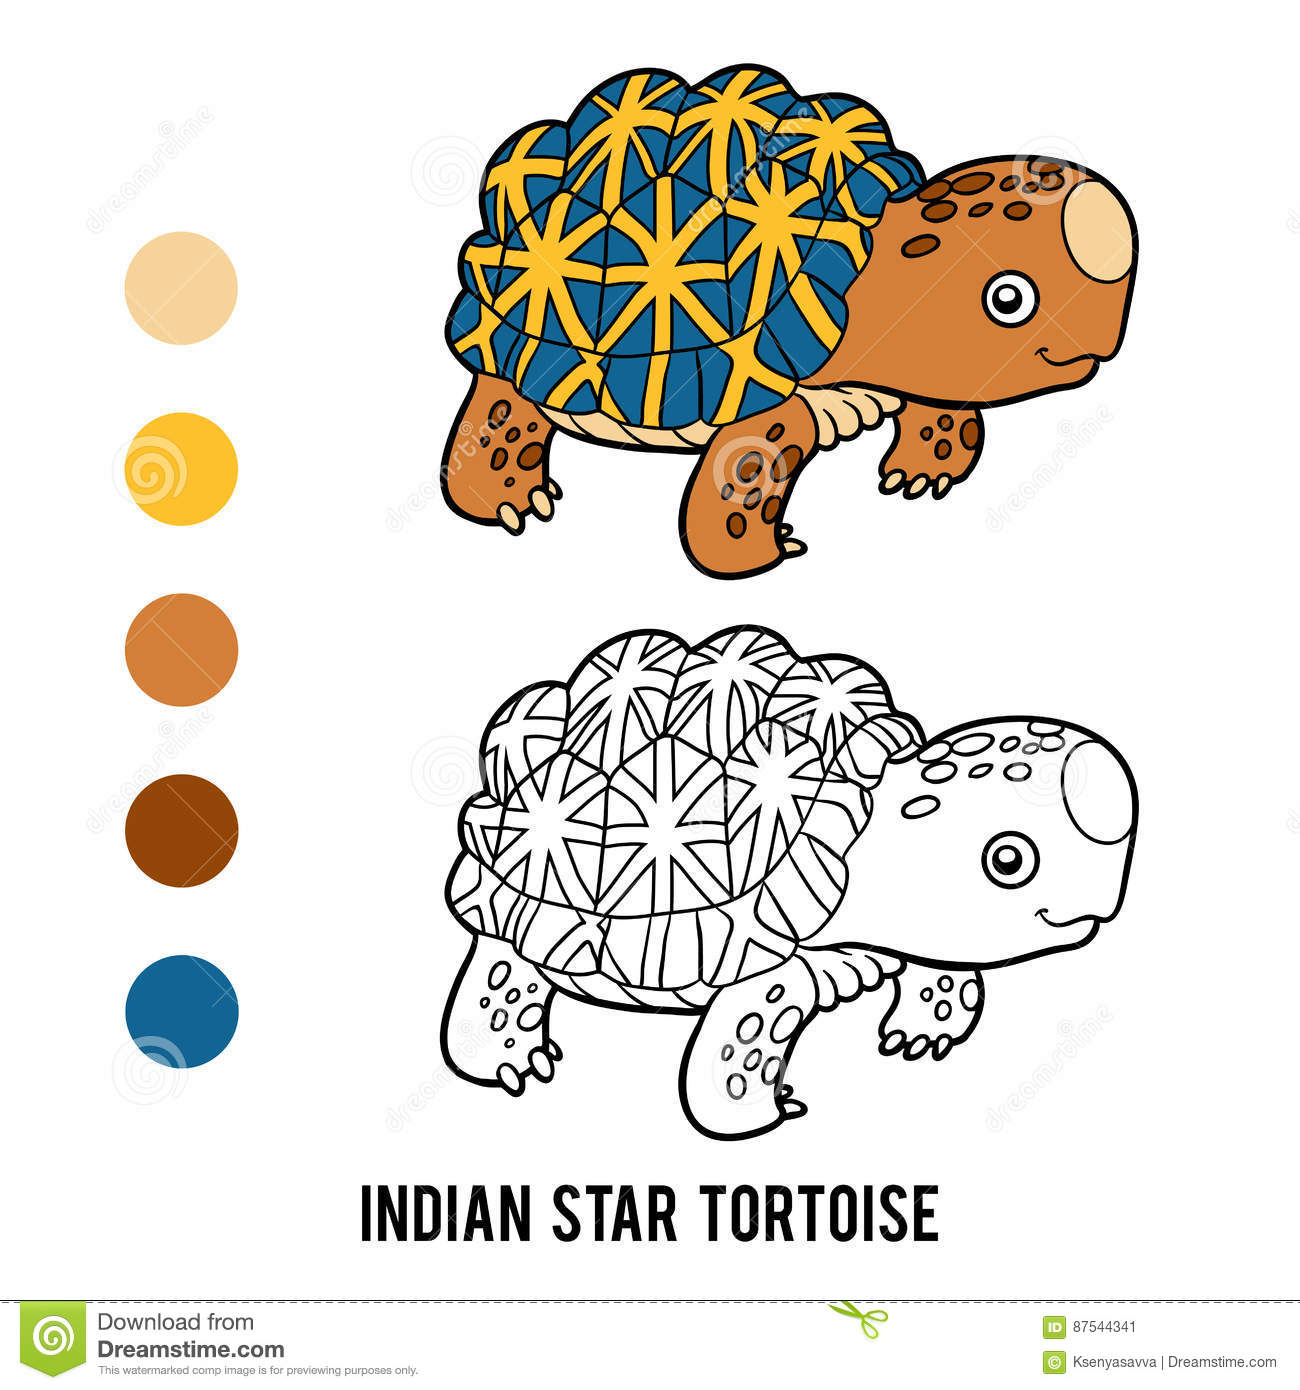 Indian Star Tortoise coloring #11, Download drawings